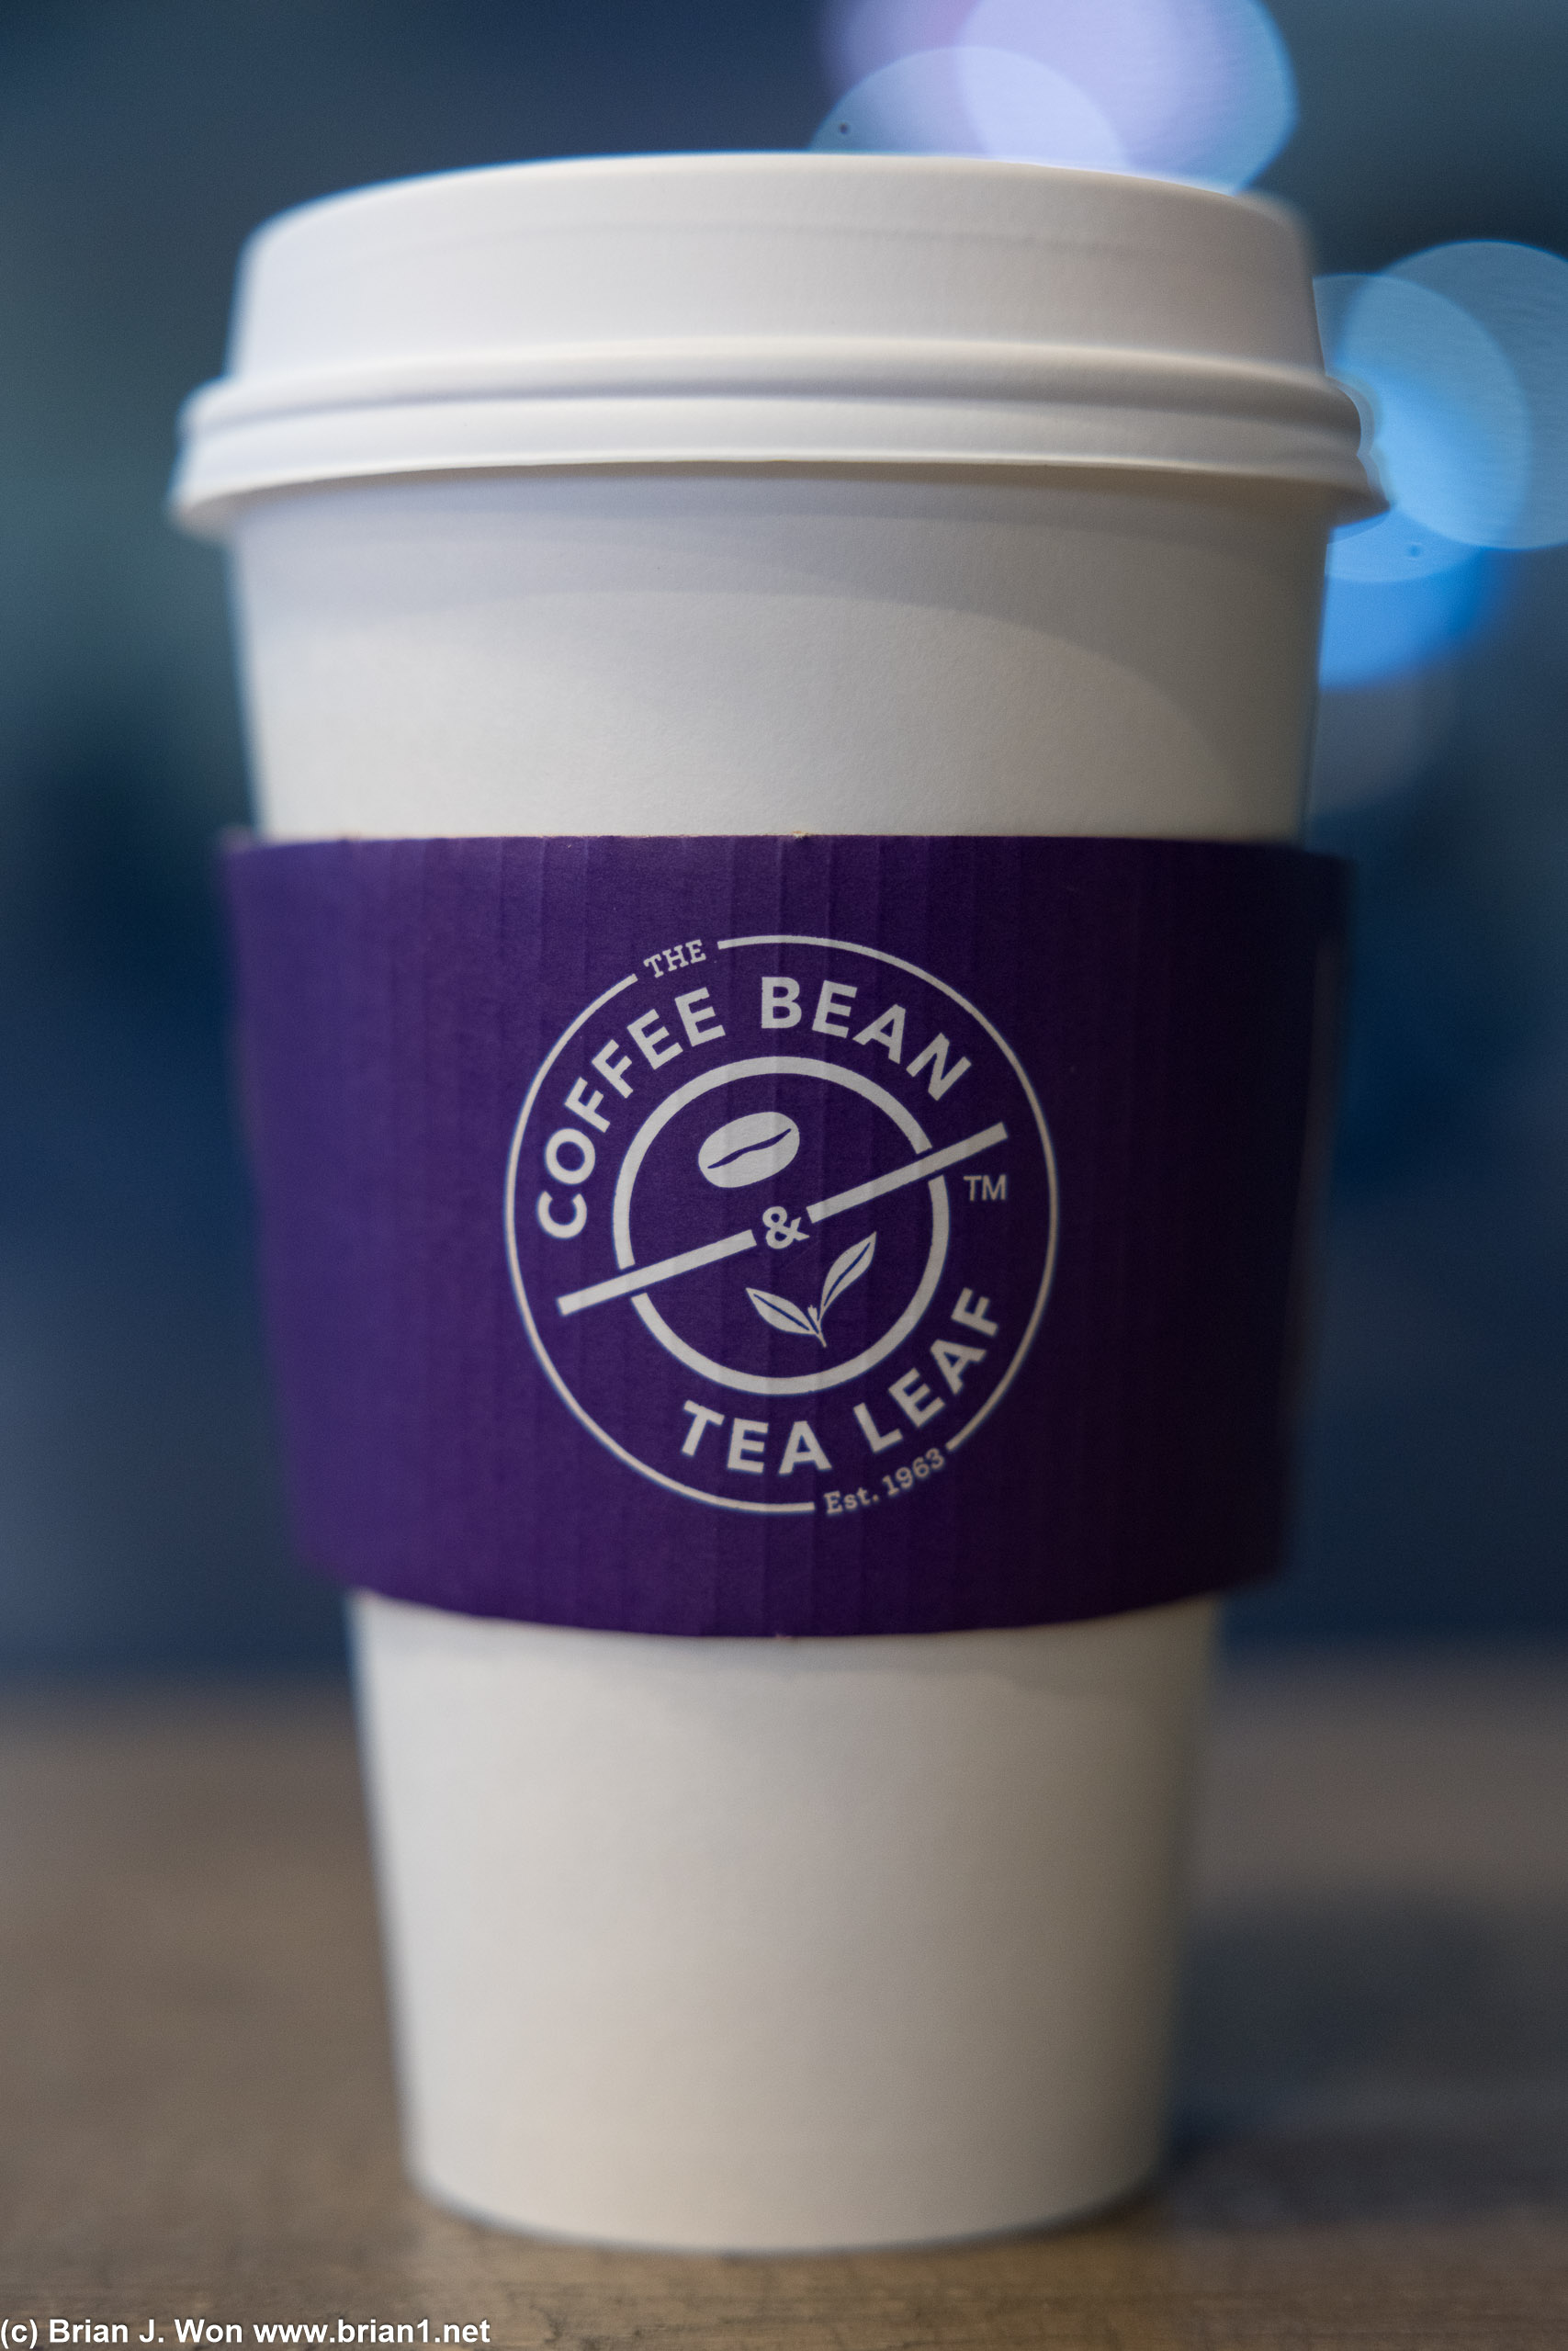 Coffee Bean and Tea Leaf seems to be dying in the USA, but doing okay internationally.